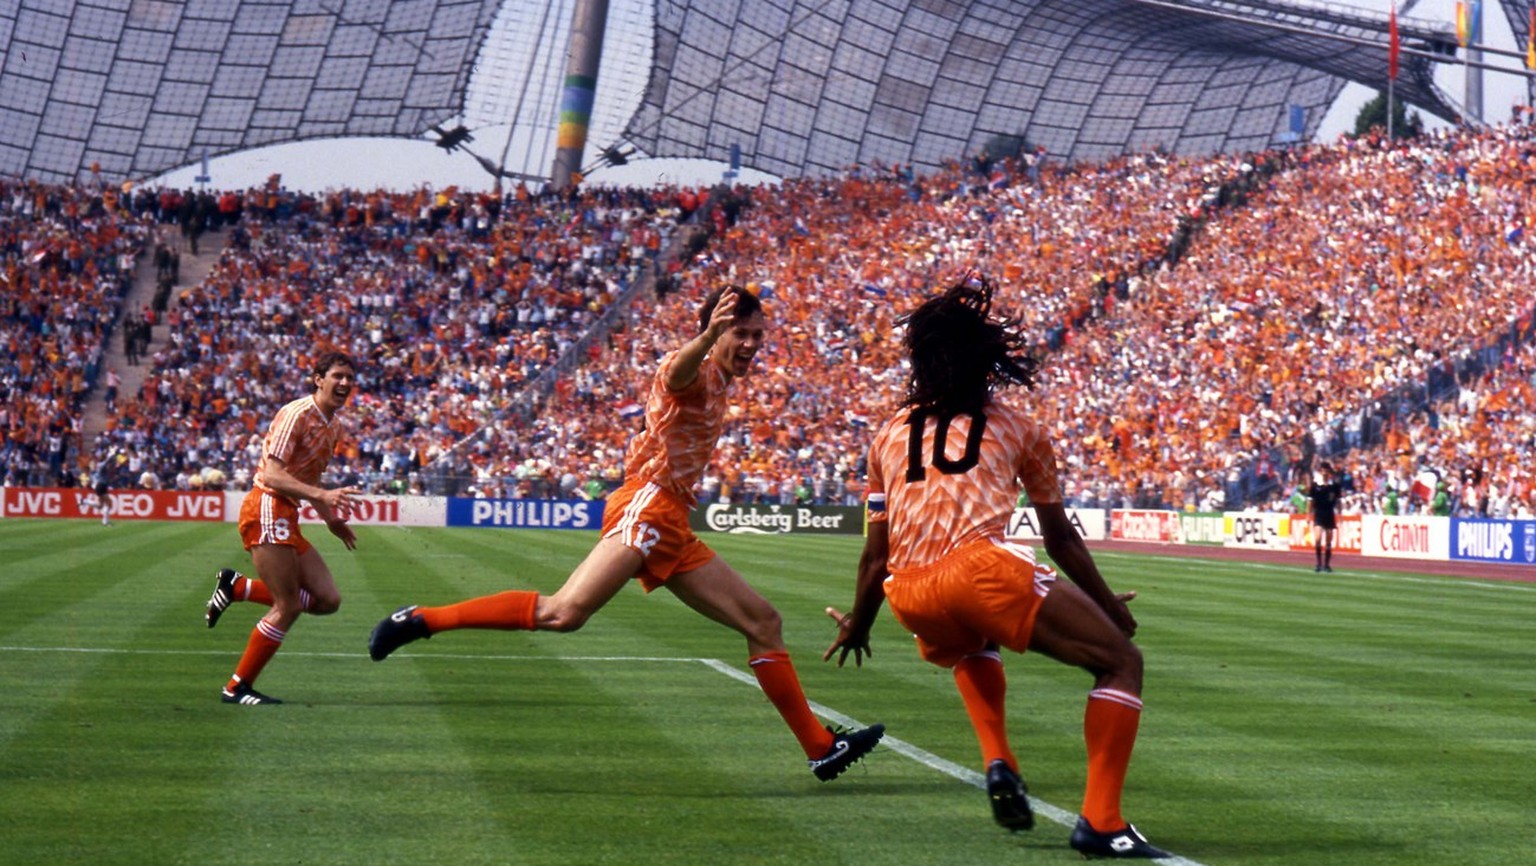 Marco Van Basten, at center, of the Netherlands soccer team celebrate with teammate Ruud Gullit, right, after scoring the winning goal during the final game of the European soccer Championships, on Ju ...